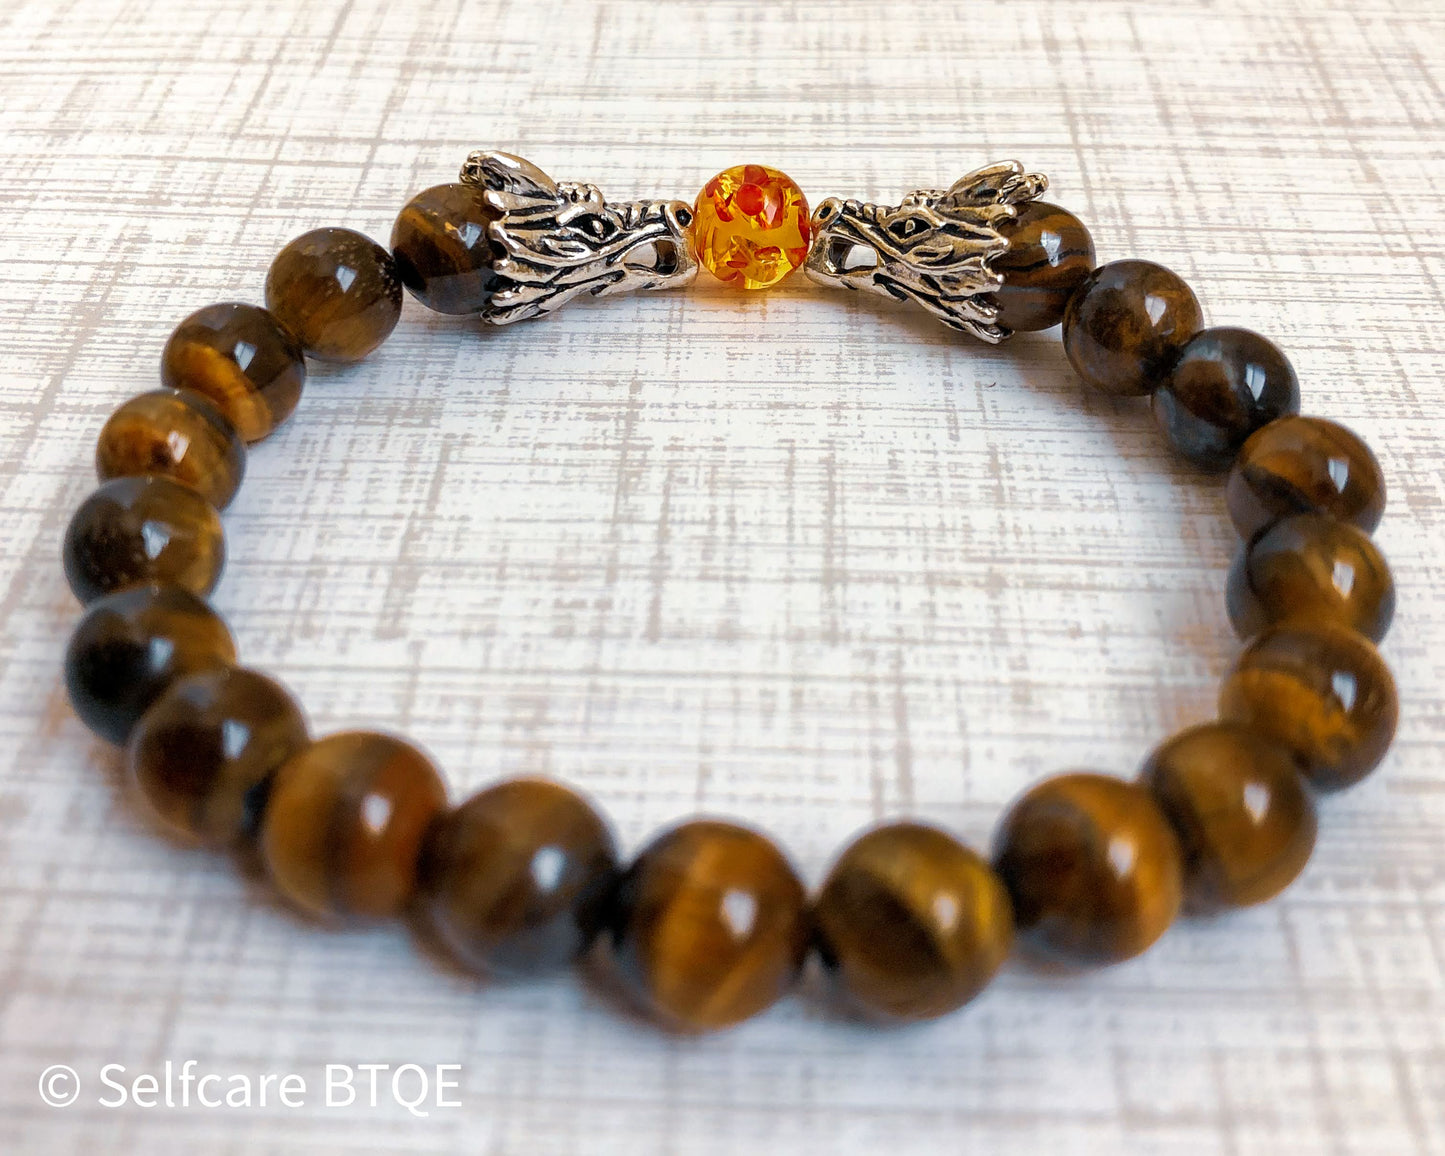 Dragon's Wisdom Amulet in Tiger's eye Stones with Amber Resin Bead |8mm